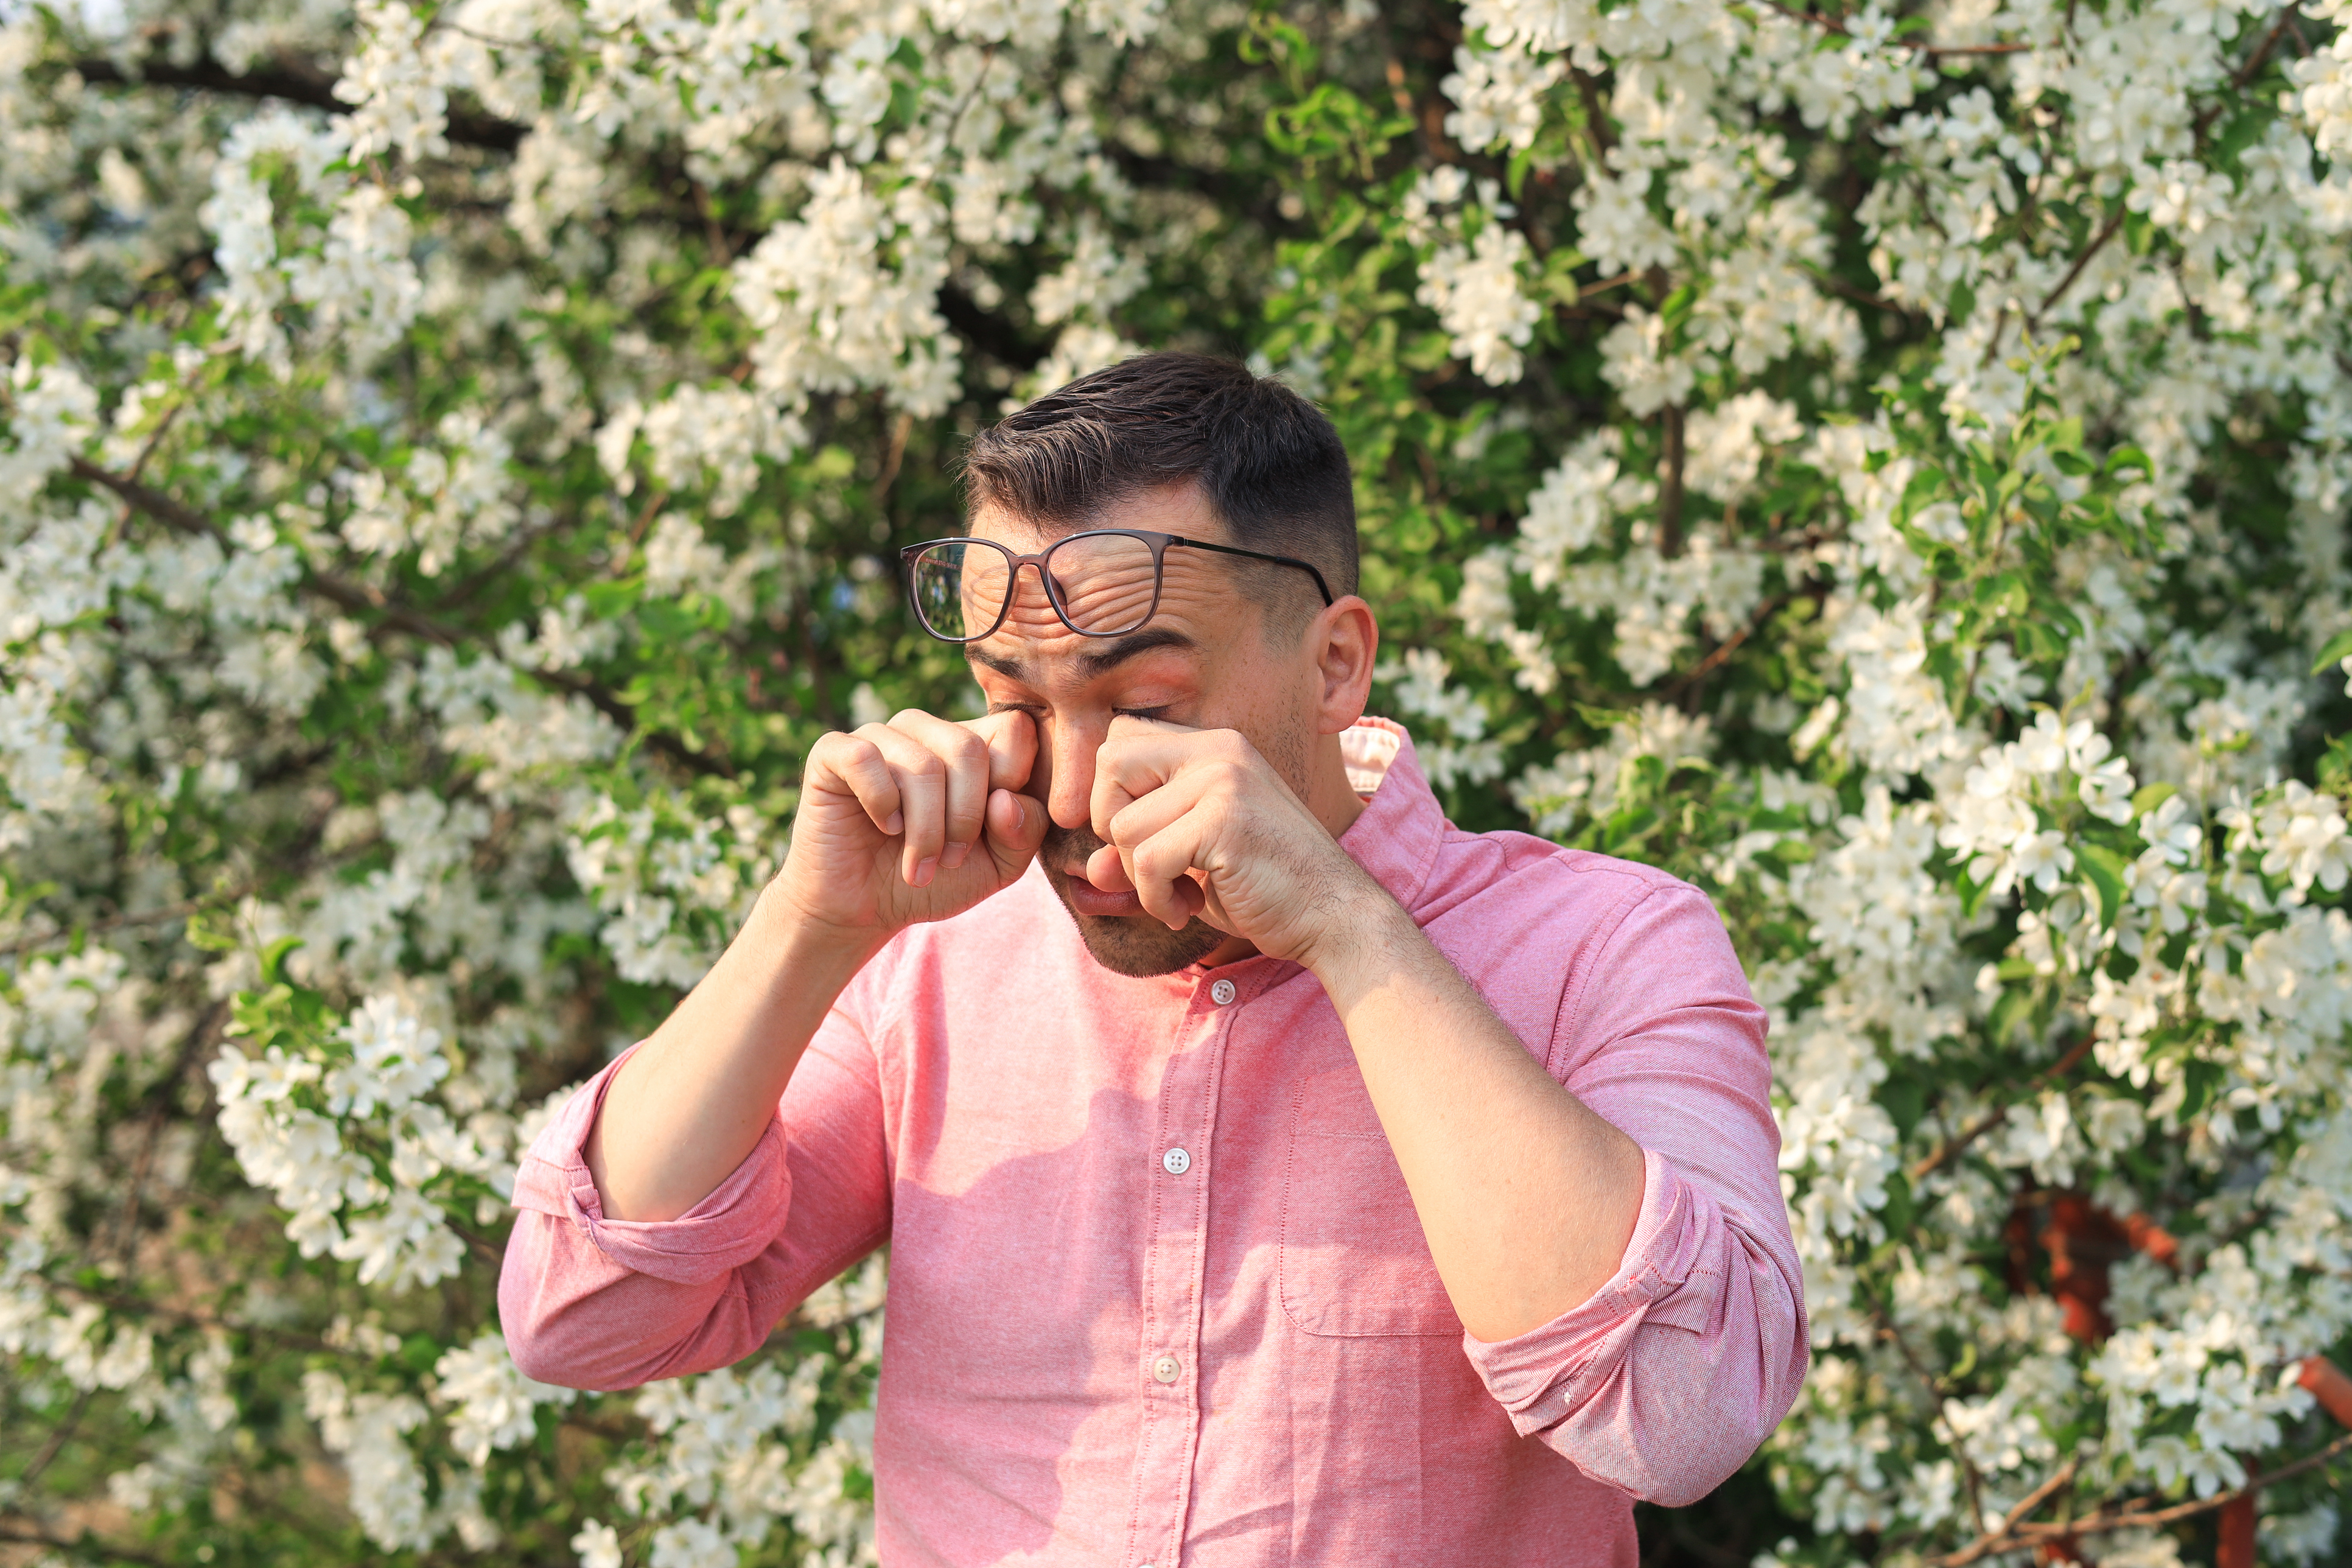 A man stands outside in front of a tree in bloom, his glasses are pushed up onto his brow while he rubs his itchy eyes.